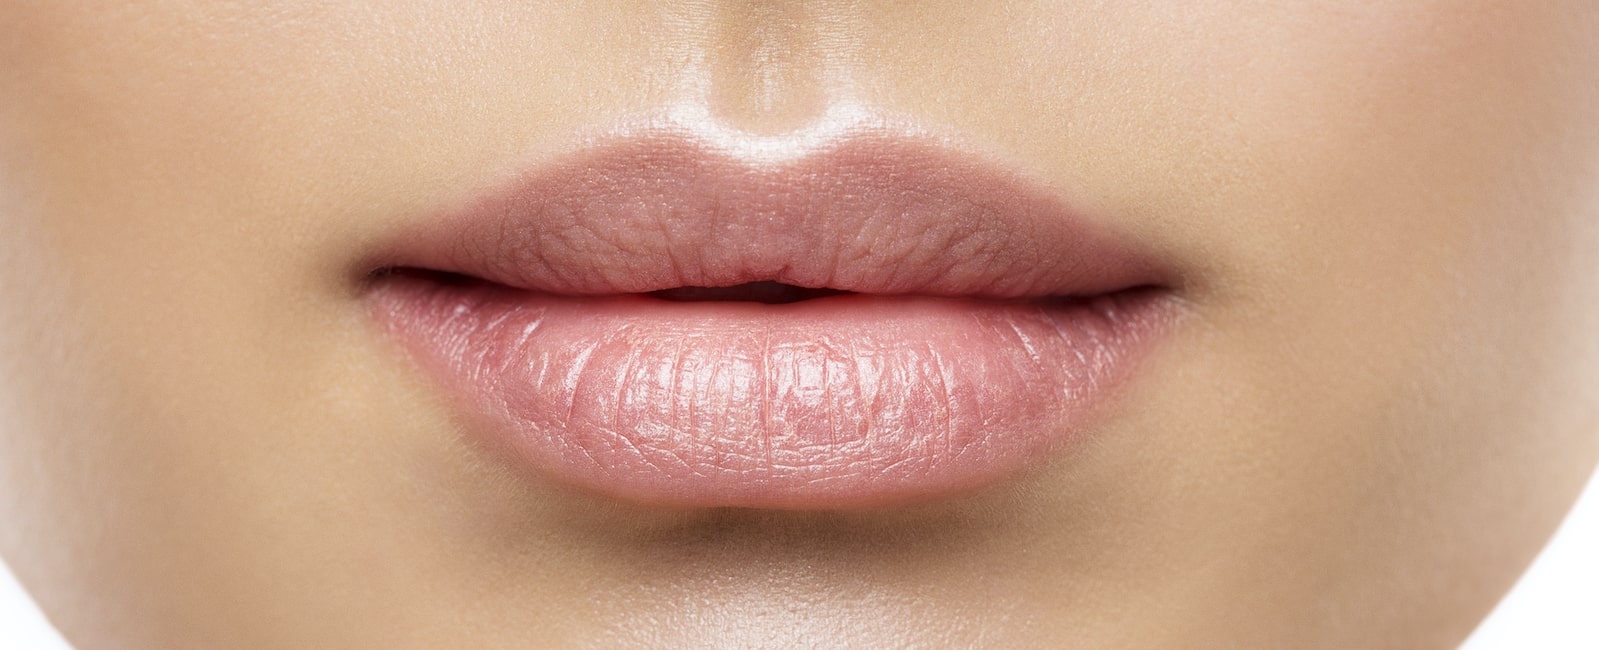 lip filler injections